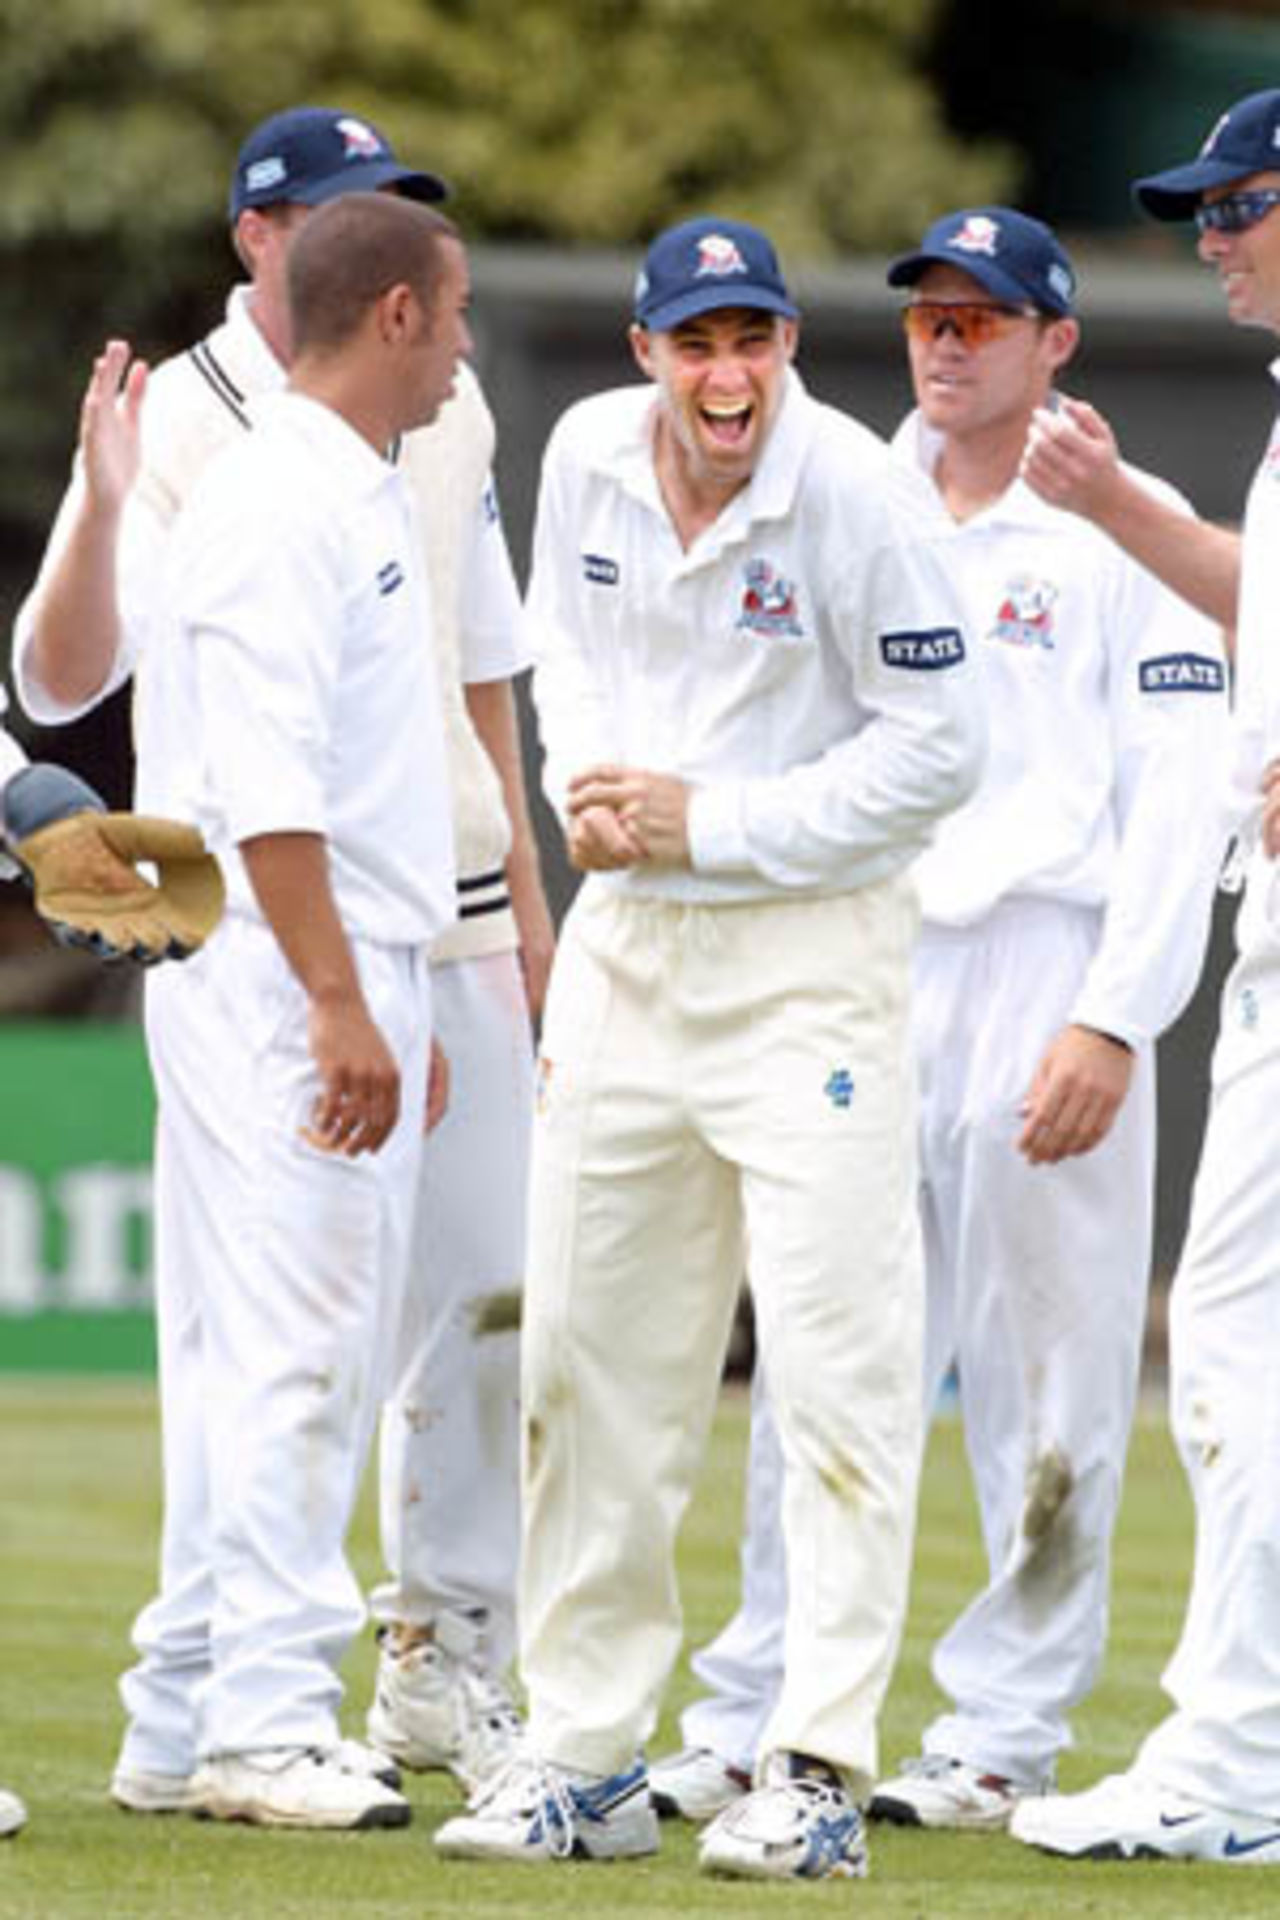 Auckland player Matthew Horne celebrates the dismissal of a Bangladeshi batsman by bowler Andre Adams (left). Also celebrating are Lou Vincent (right) and Chris Drum (far right). Tour match: Auckland v Bangladeshis at Eden Park Outer Oval, Auckland, 12-15 Dec 2001 (12 December 2001).